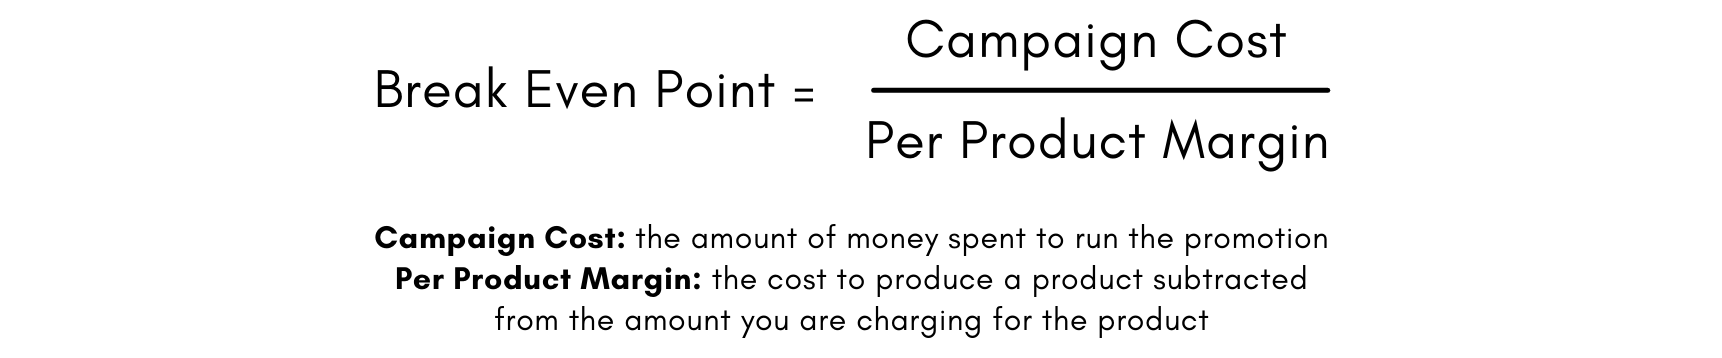 Formula to determine your Break Even Point: Overall Campaign Cost divided by Per Product Margin.